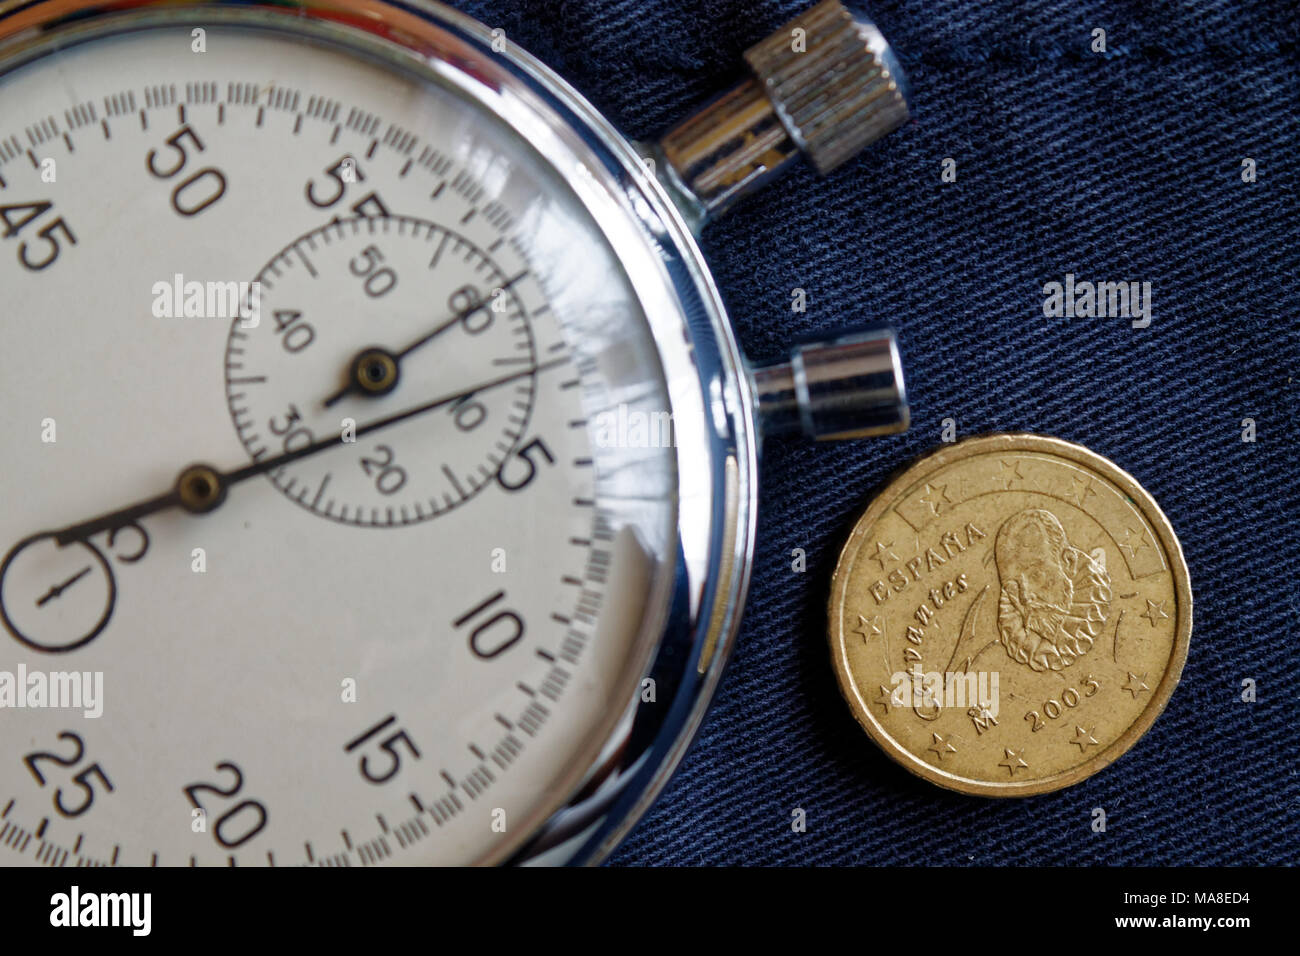 Euro coin with a denomination of 10 euro cents (back side) and stopwatch on old blue denim backdrop - business background Stock Photo